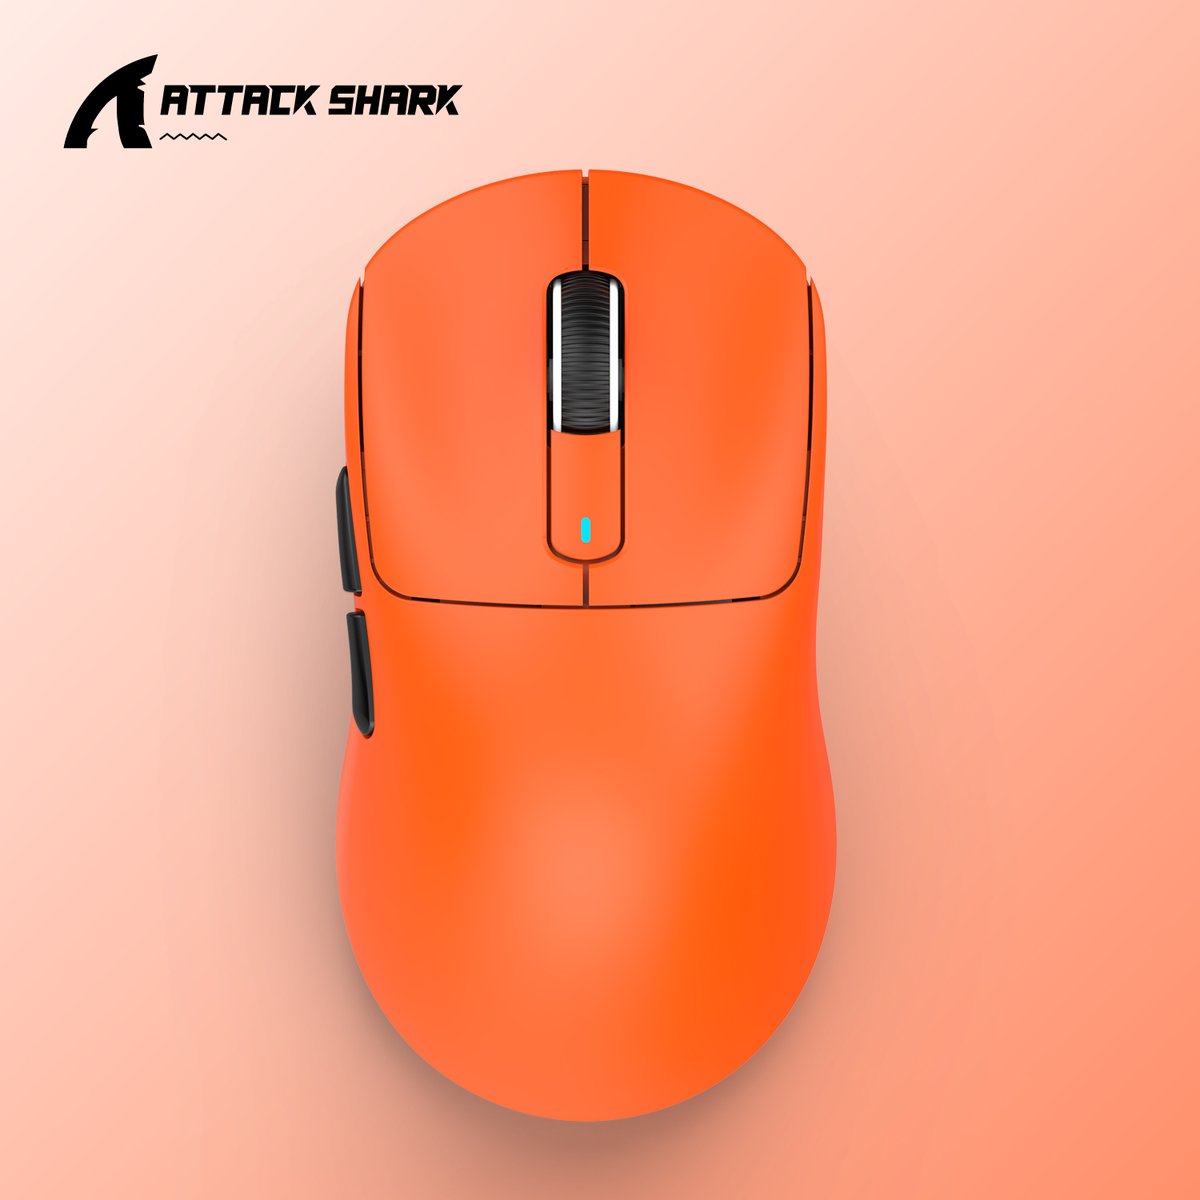 🦈3 Hour Countdown🦈

💡Attack Shark Website will be launched in 3 hours.

🖱️X3,X3PRO,X6,R1 mouse will be available.
⌨️K86,K85,AK820 Keyboard will be available.

🛒All products are included in the giveaways!
🥇Enter the top 100 for placing orders quickly